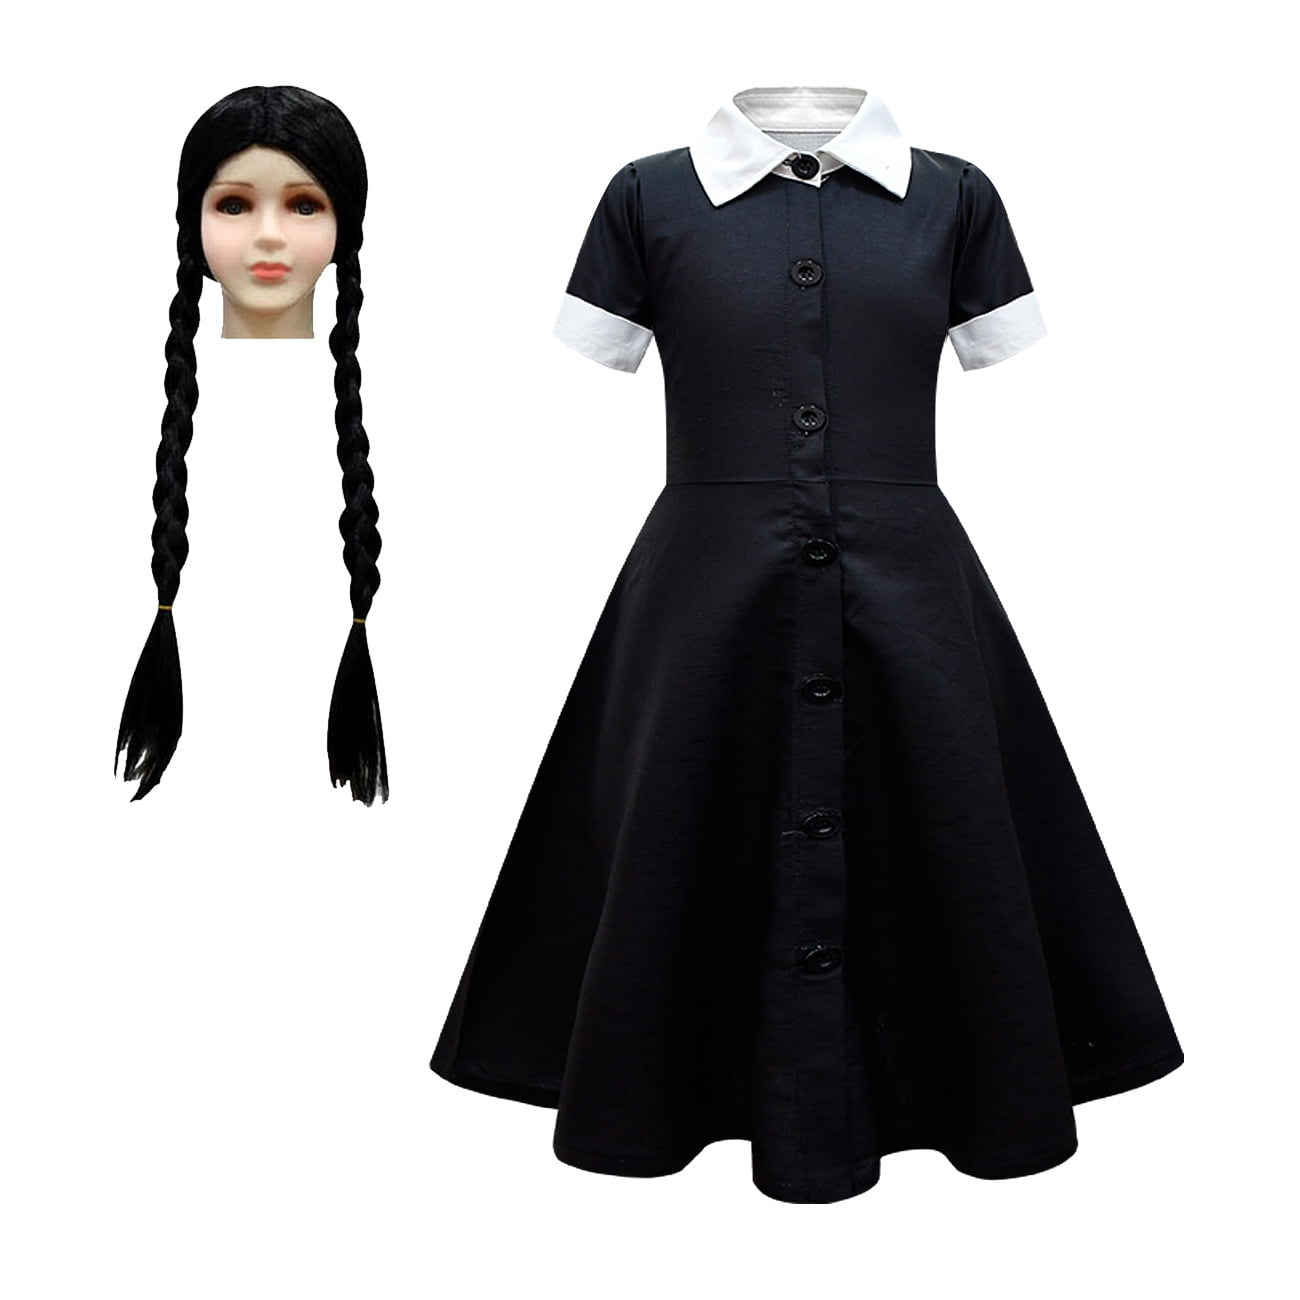 Wednesday Costume for Kids Girls Addams Family Costumes Halloween ...